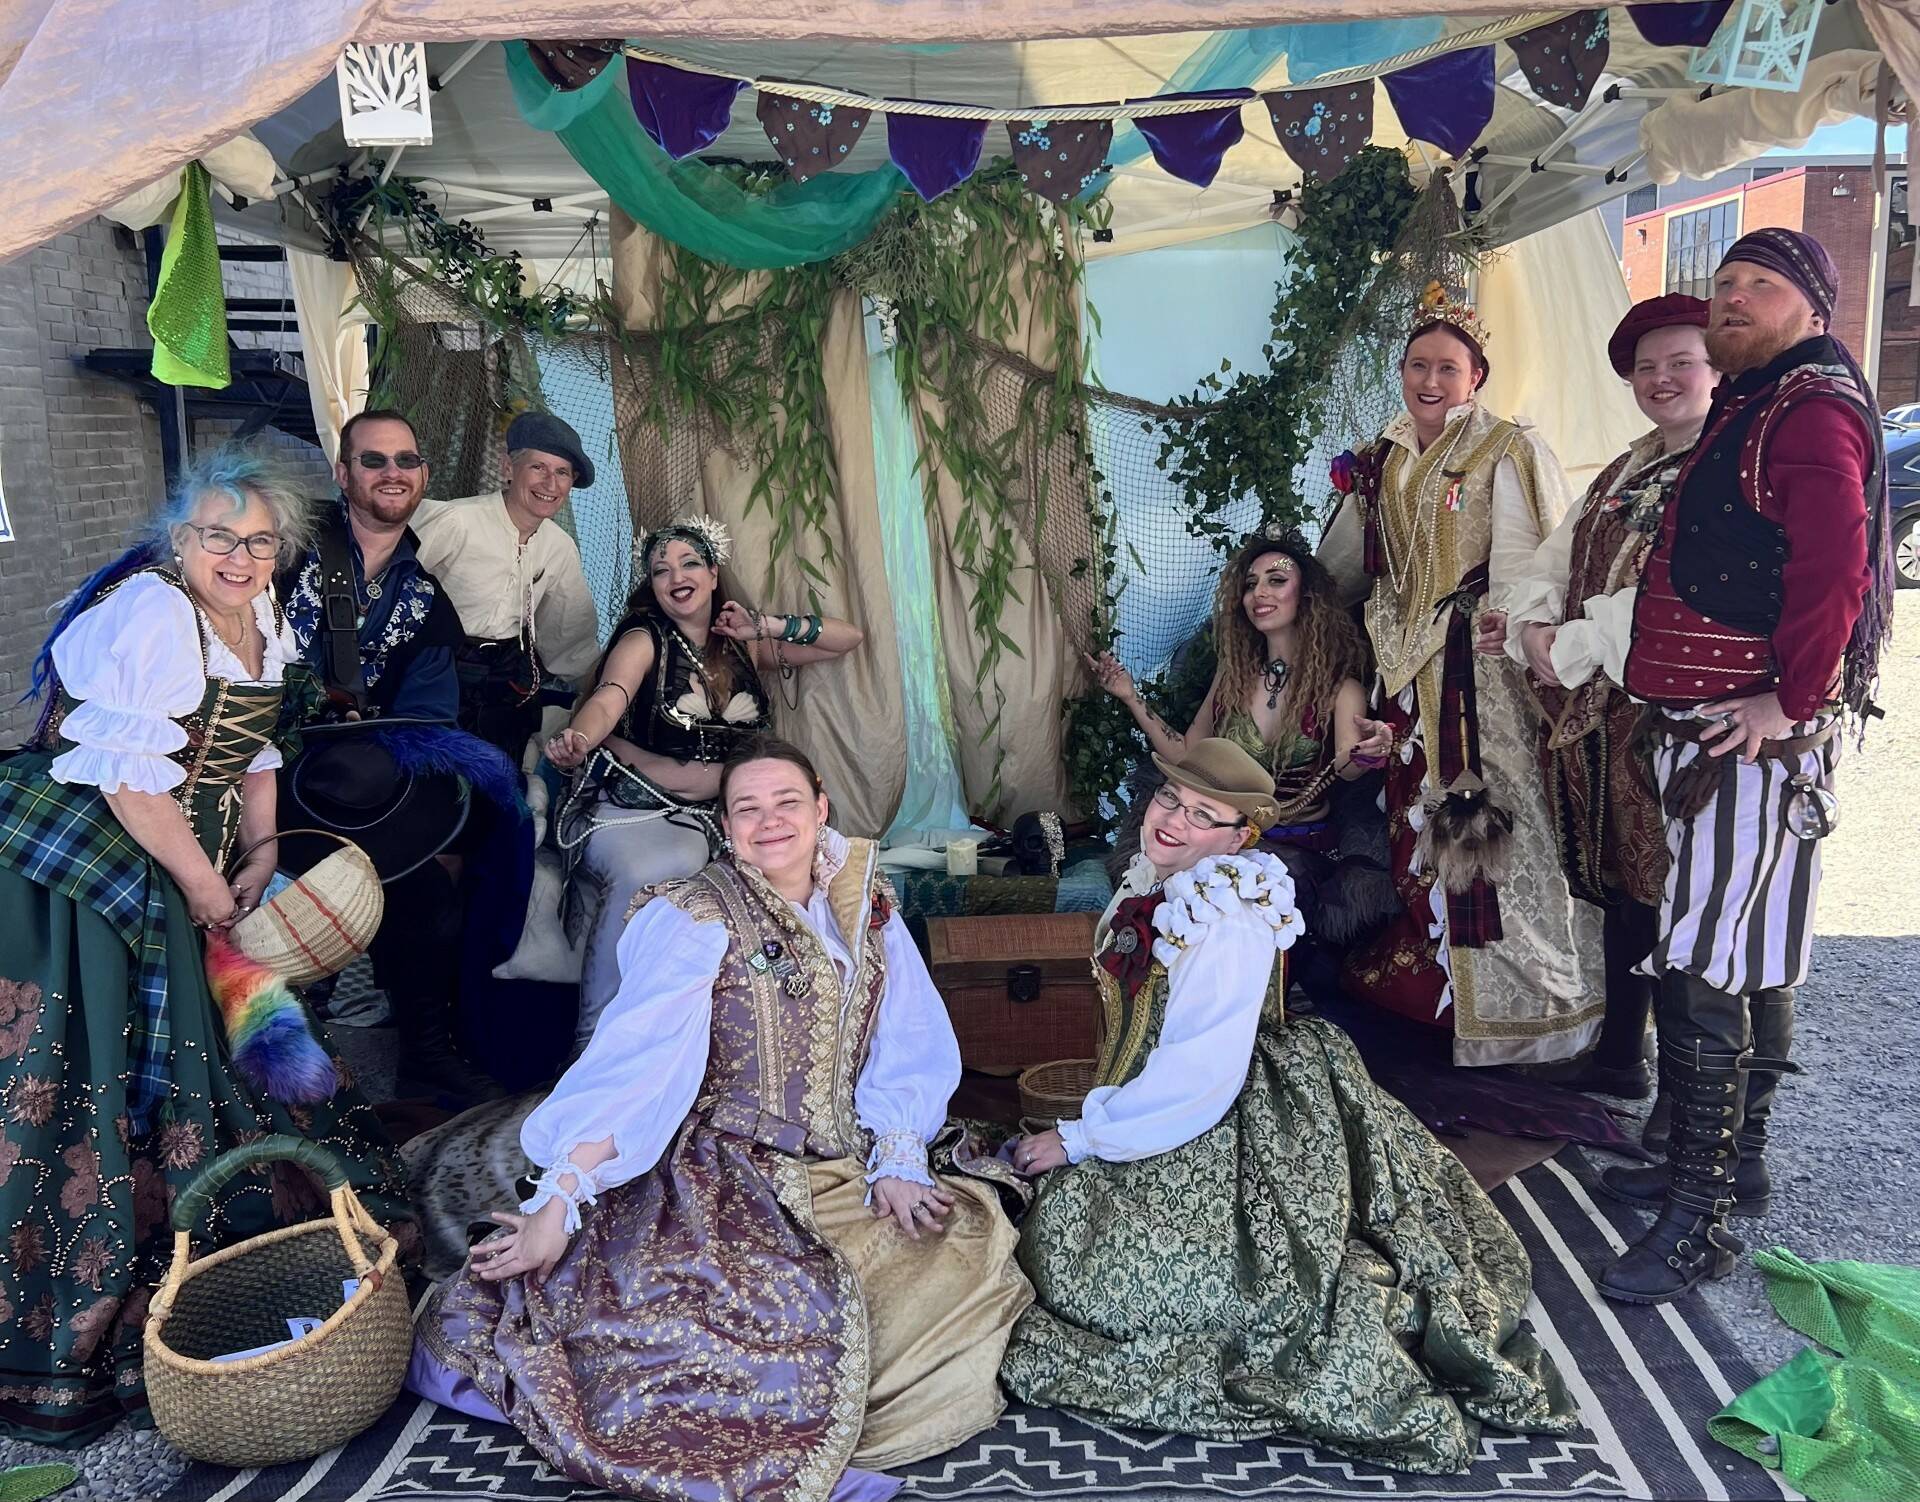 Some of the crew involved with the Whidbey Renaissance Faire. (Photo by Bill Huls)